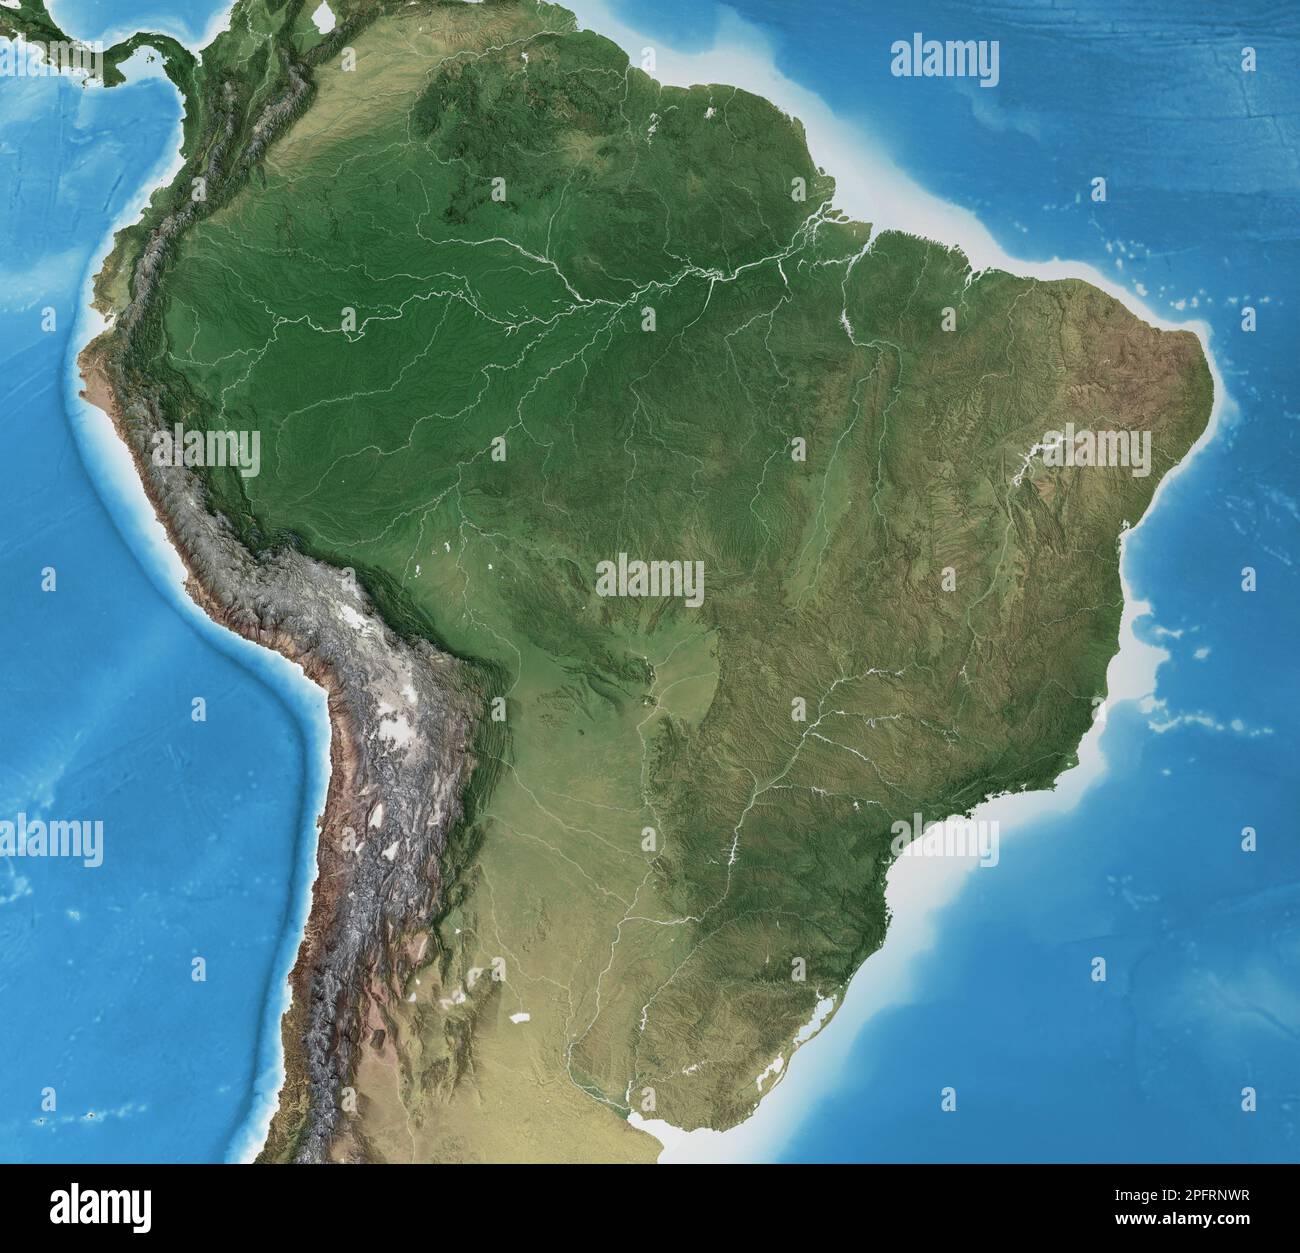 Physical map of Brazil. Geography and topography of Amazon rainforest. Detailed flat view of the Planet Earth - elements furnished by NASA Stock Photo